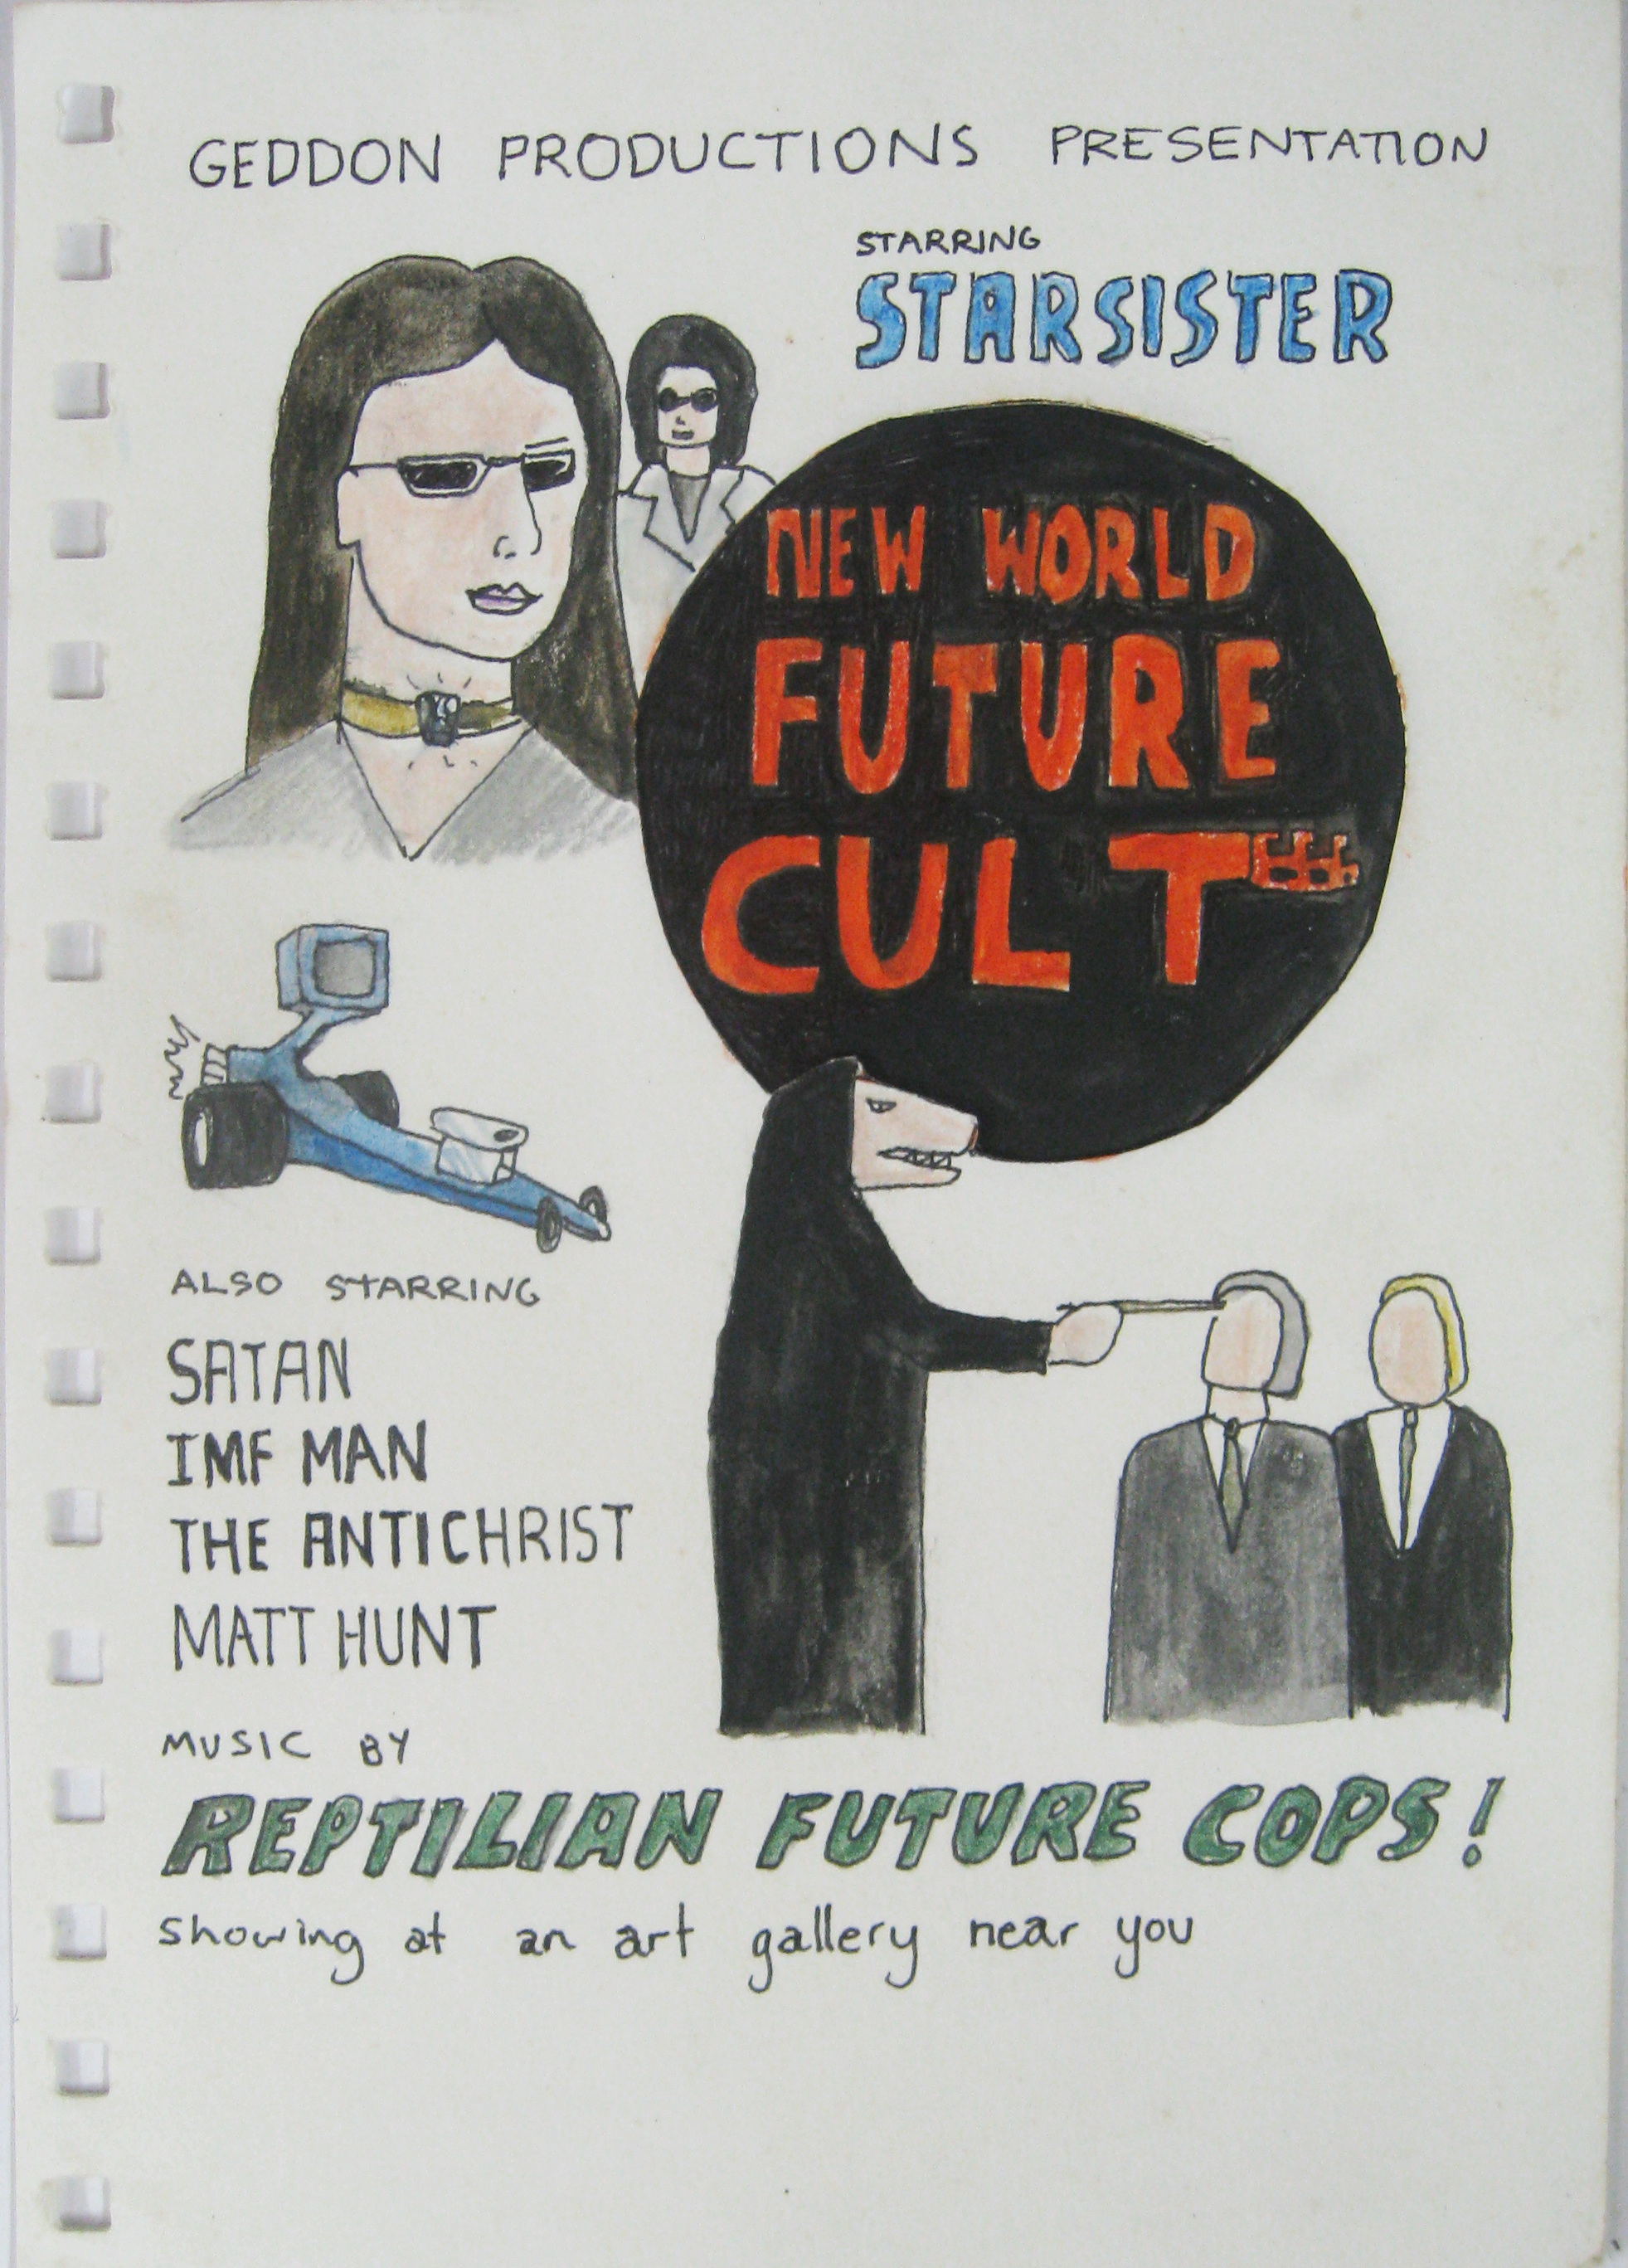 NEW WORLD FUTURE CULT TITLE PAGE STUDY